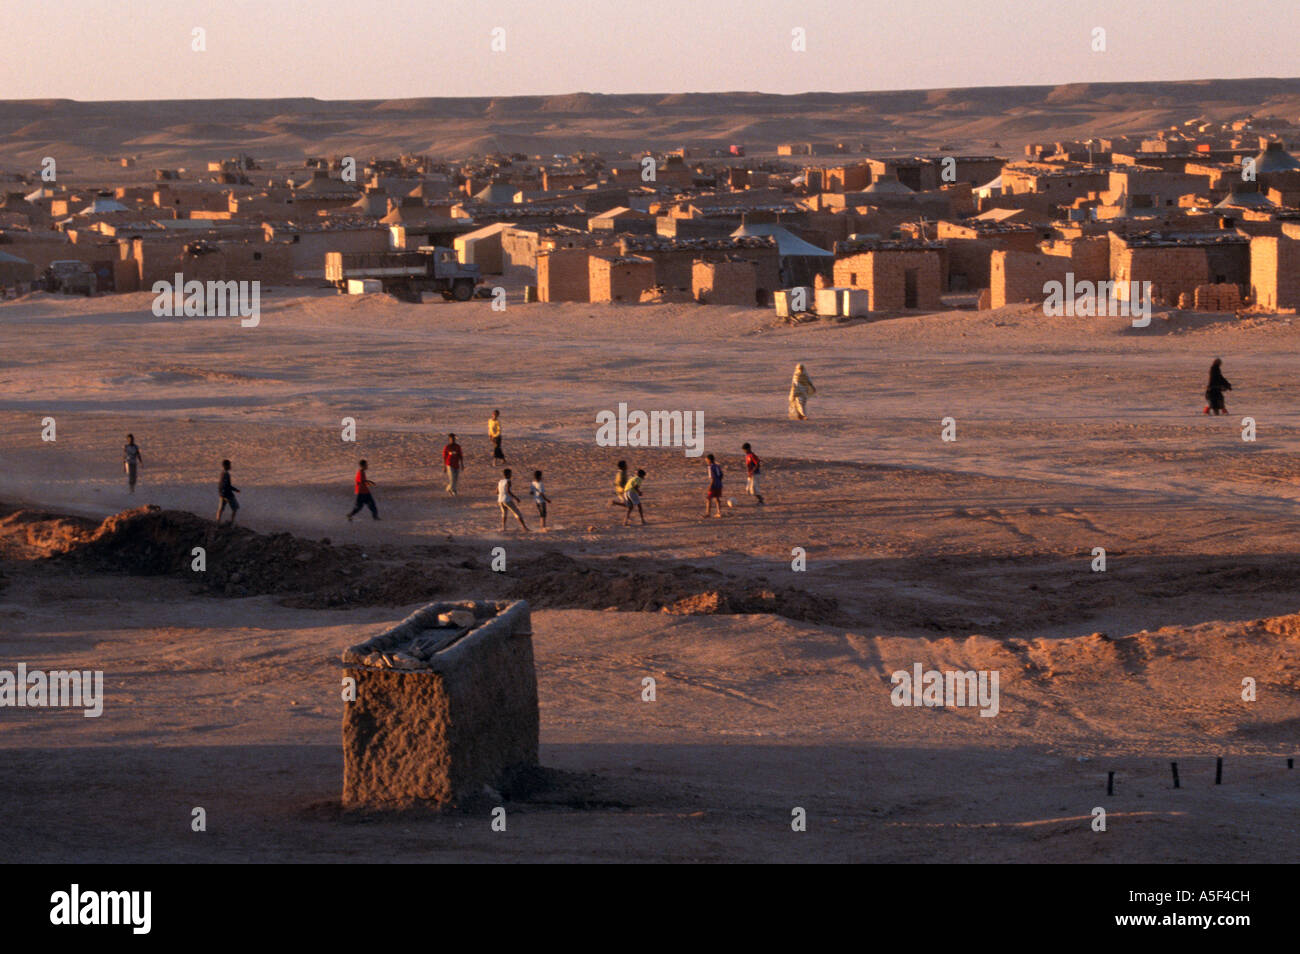 People enjoy their evening in Saharawi refugee camp in Tindouf Western Algeria Stock Photo